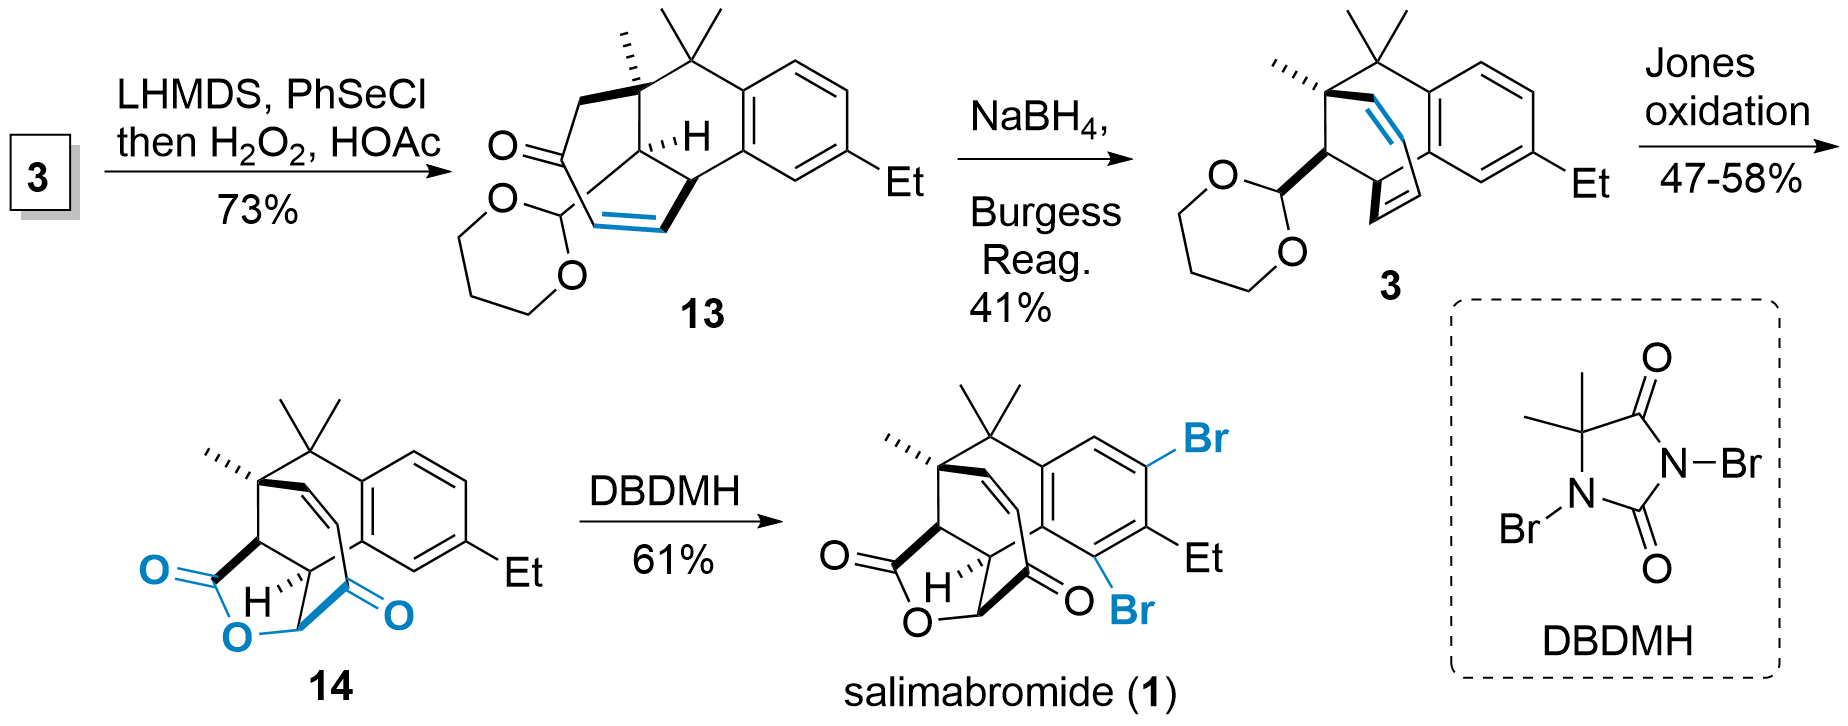 salimabromide-3.png